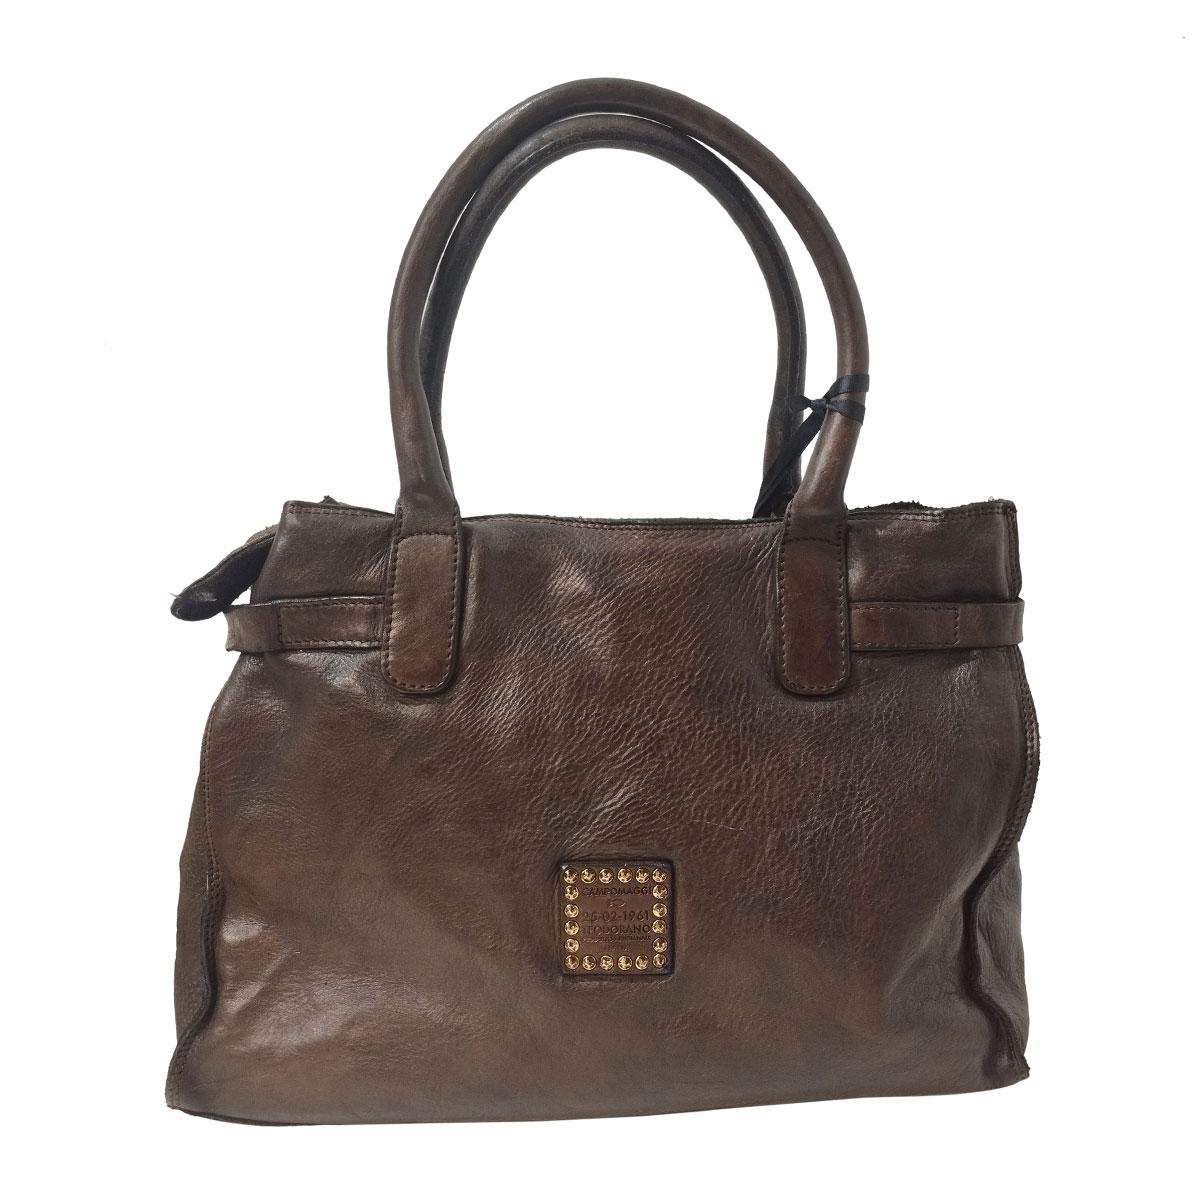 Beautiful and easy to wear italian manufactured bag
Leather bag from Campomaggi Italy
Brown color
Bow
Double handle
Can be carried crossbody
Zip closure
Internal zip pocket and phone holder
Cm 36 x 26 x 13 (14,1 x 10,2 x 5,11 inches)
Fast shipping